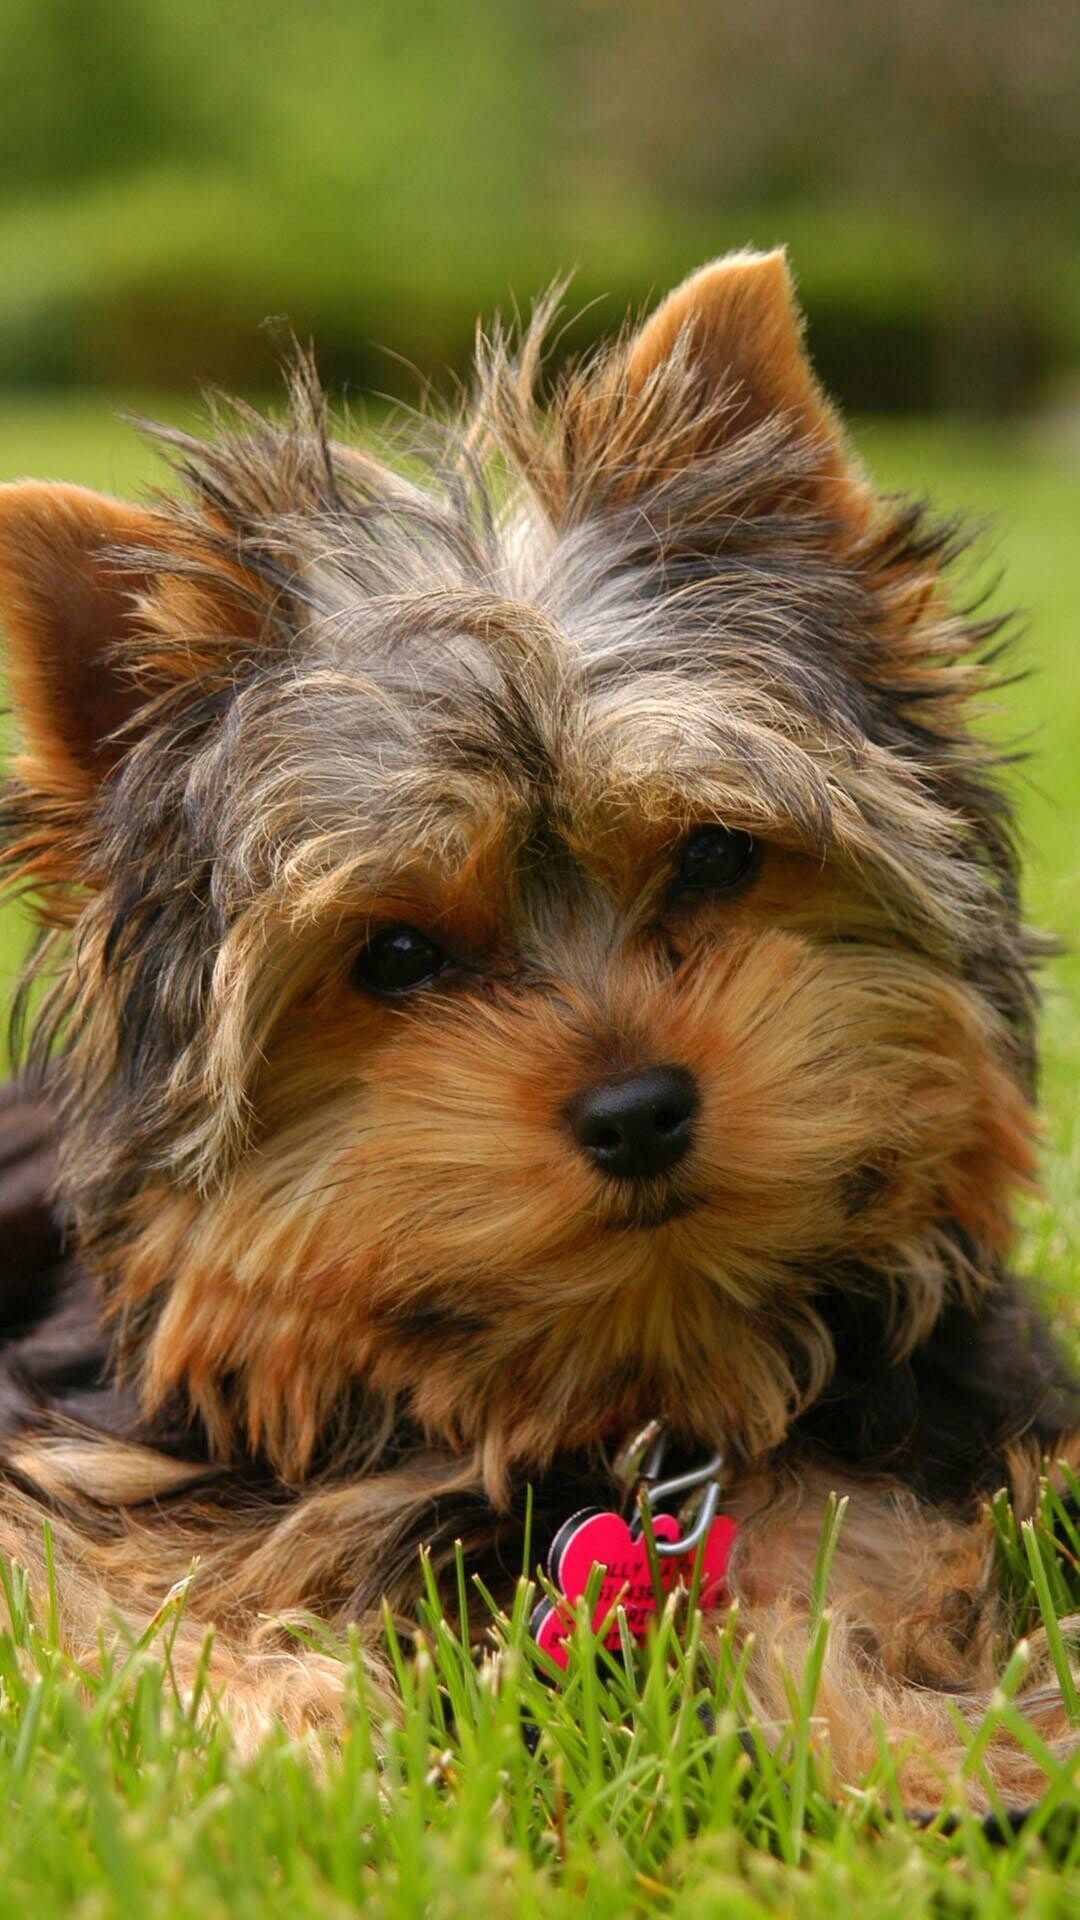 Yorkshire Terrier: A popular companion dog, Has a black and tan coat. 1080x1920 Full HD Wallpaper.